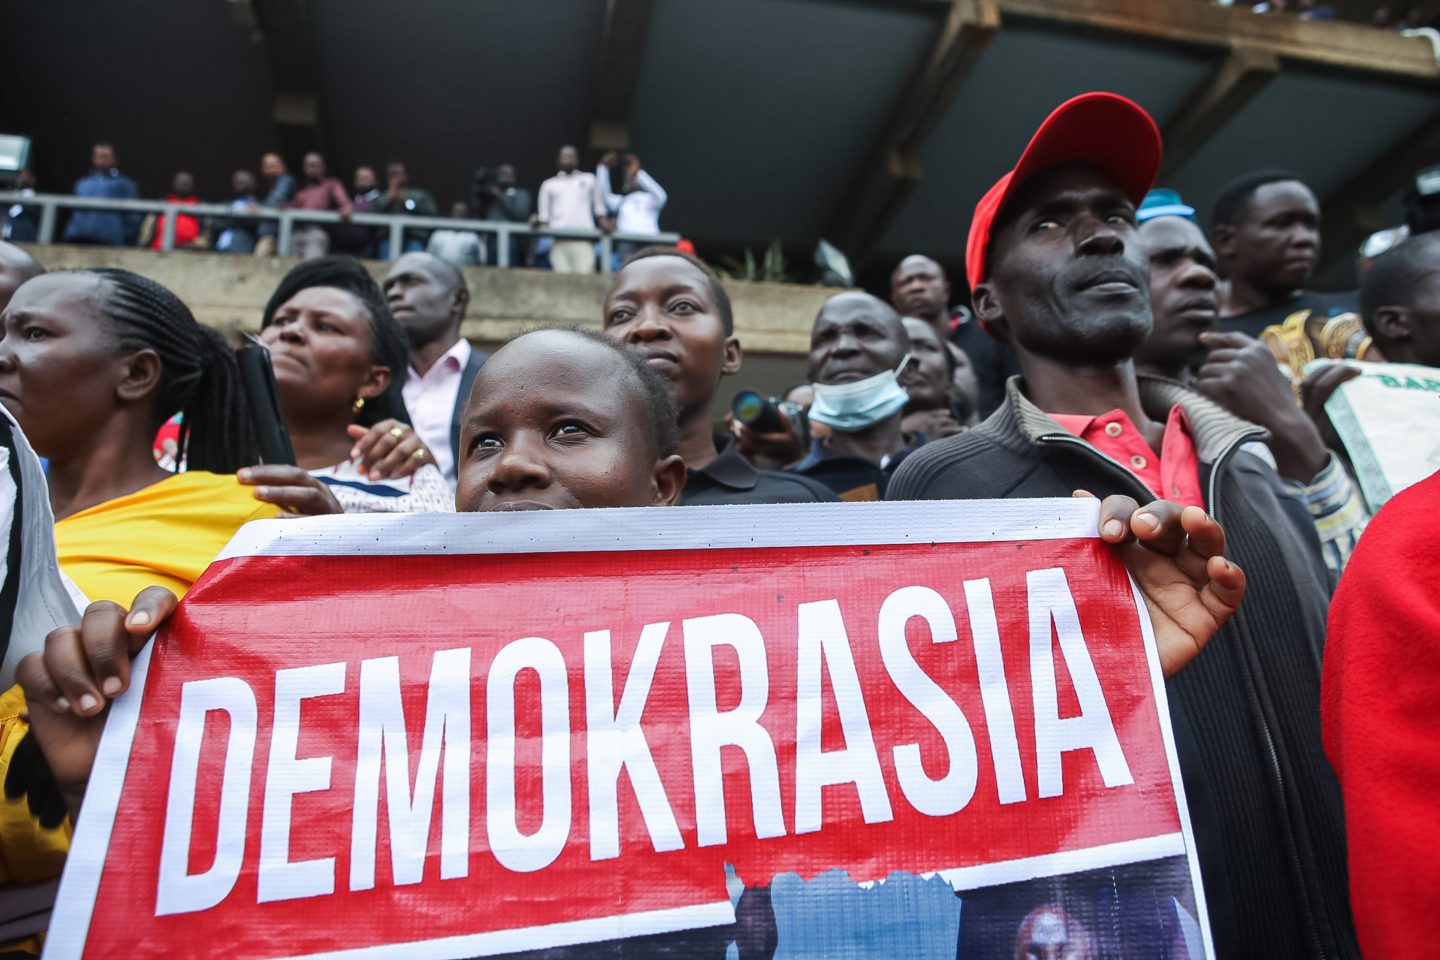 A Kenyan woman carrying a placard that says "Democracy" in "Swahili" listens to the Azimio la Umoja presidential candidate Raila Odinga at the Kenyatta International Convention Centre (KICC ) after the filing of the election petition challenging the presidential results of the just concluded general elections in Kenya held on 9 August 2022.